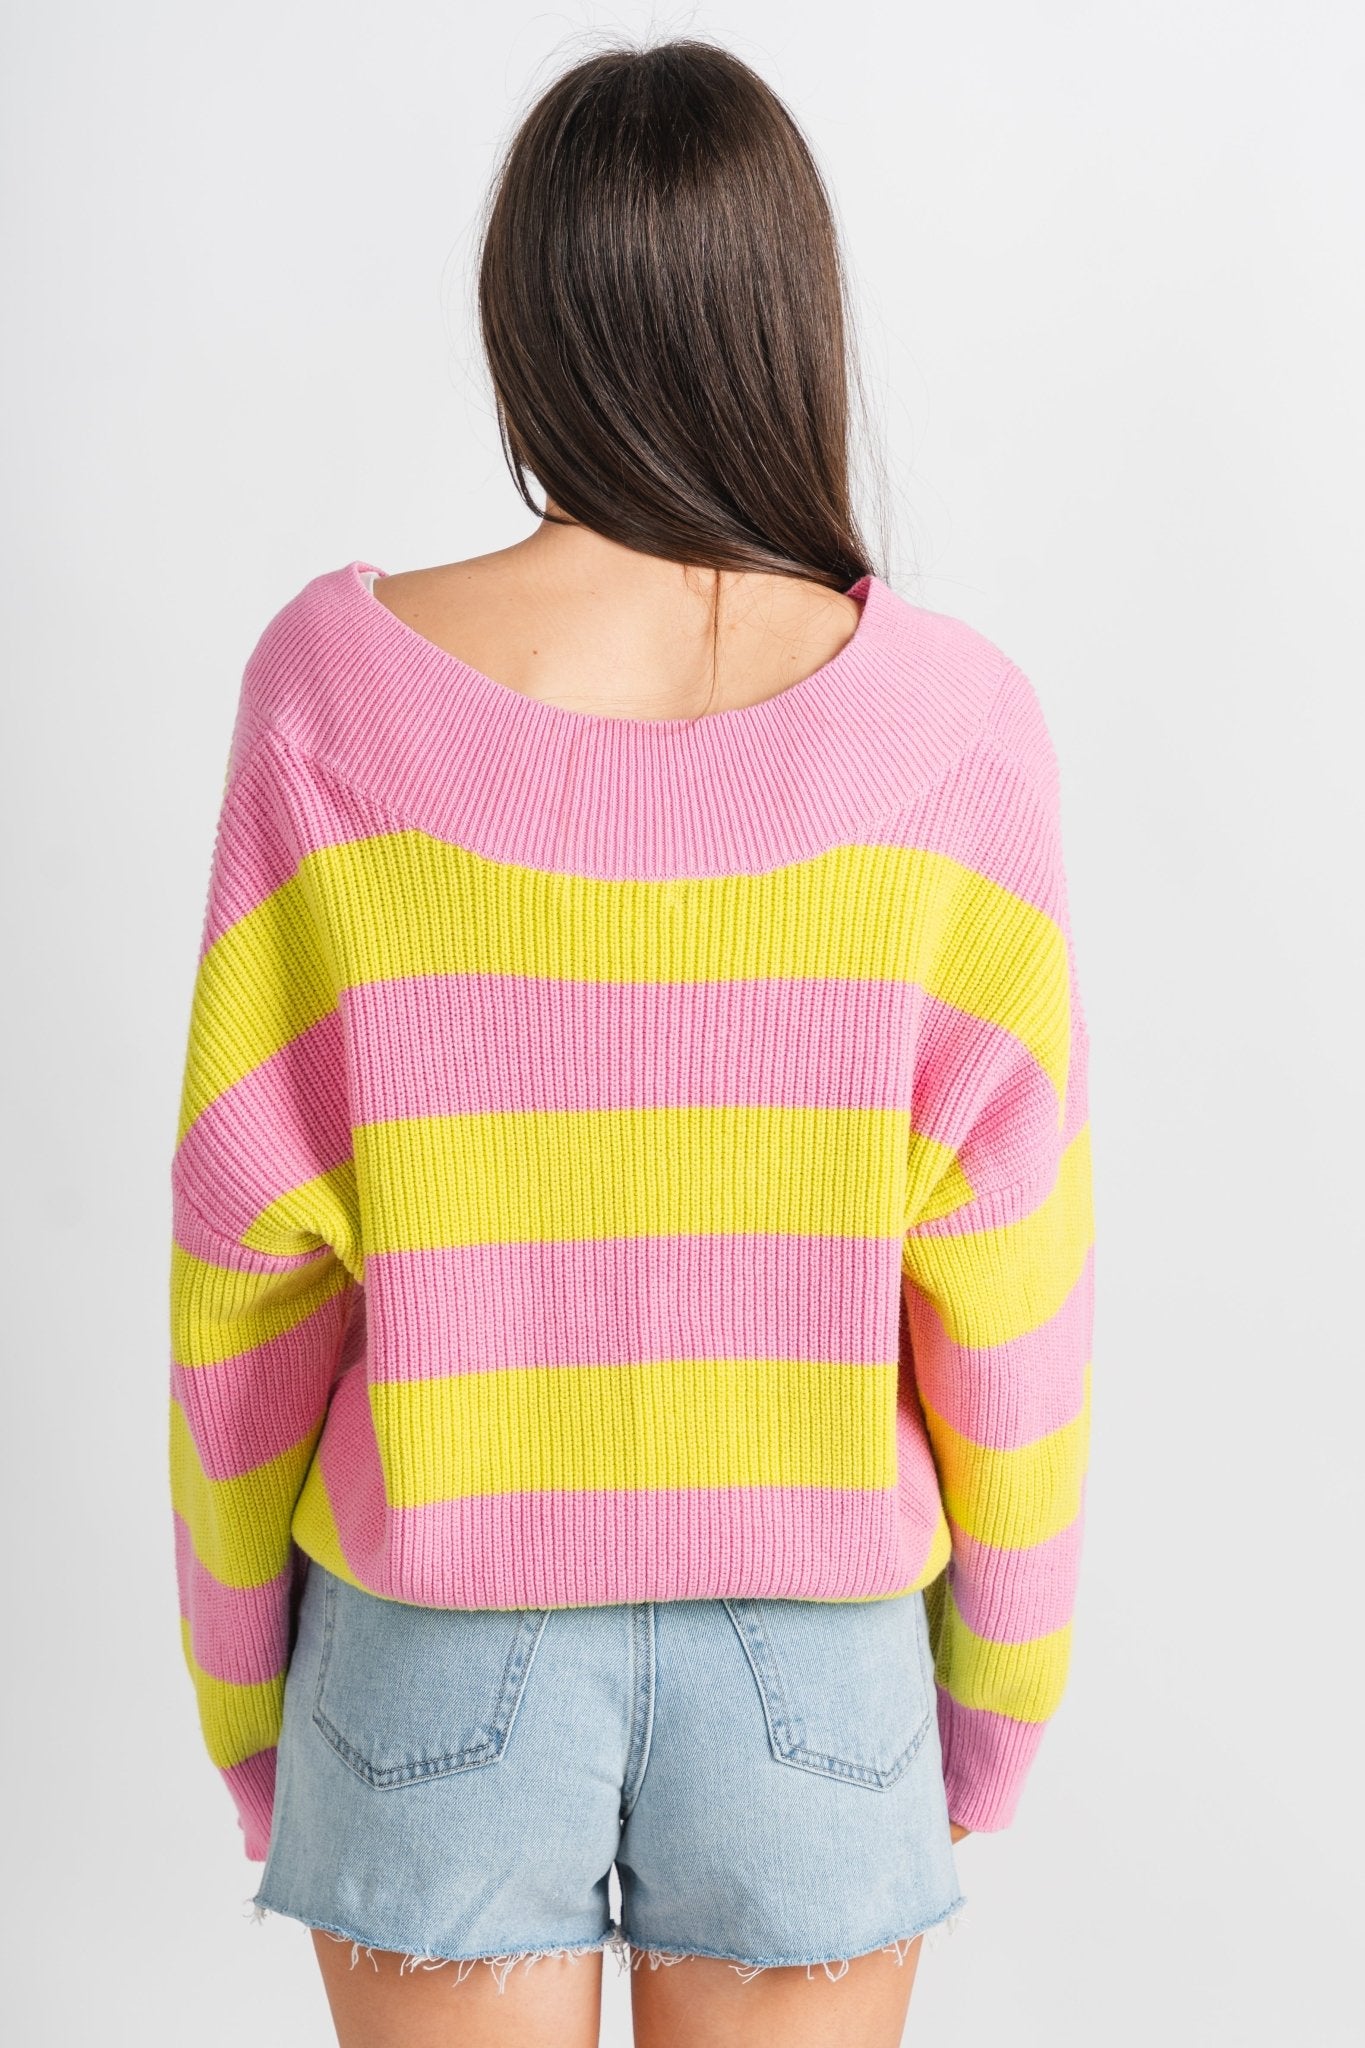 Stripe v-neck sweater pink/lime – Unique Sweaters | Lounging Sweaters and Womens Fashion Sweaters at Lush Fashion Lounge Boutique in Oklahoma City